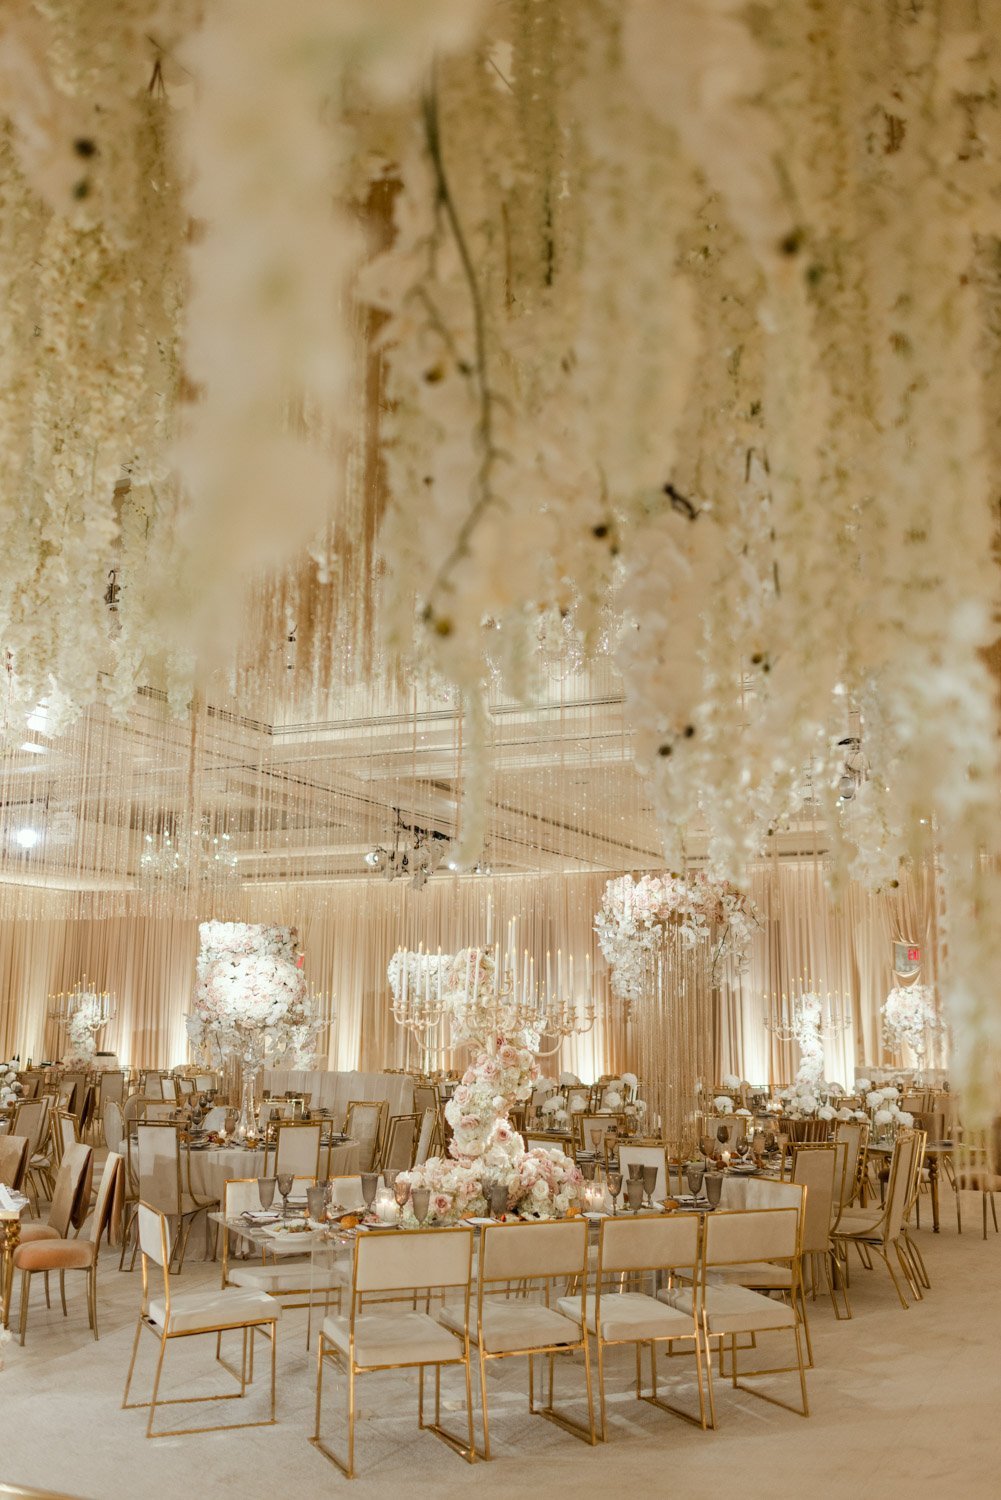 Pale pink and cream roses surrounded by crystals and gold accents create a bright and bold ballroom setting at the Ritz-Carlton Laguna Niguel